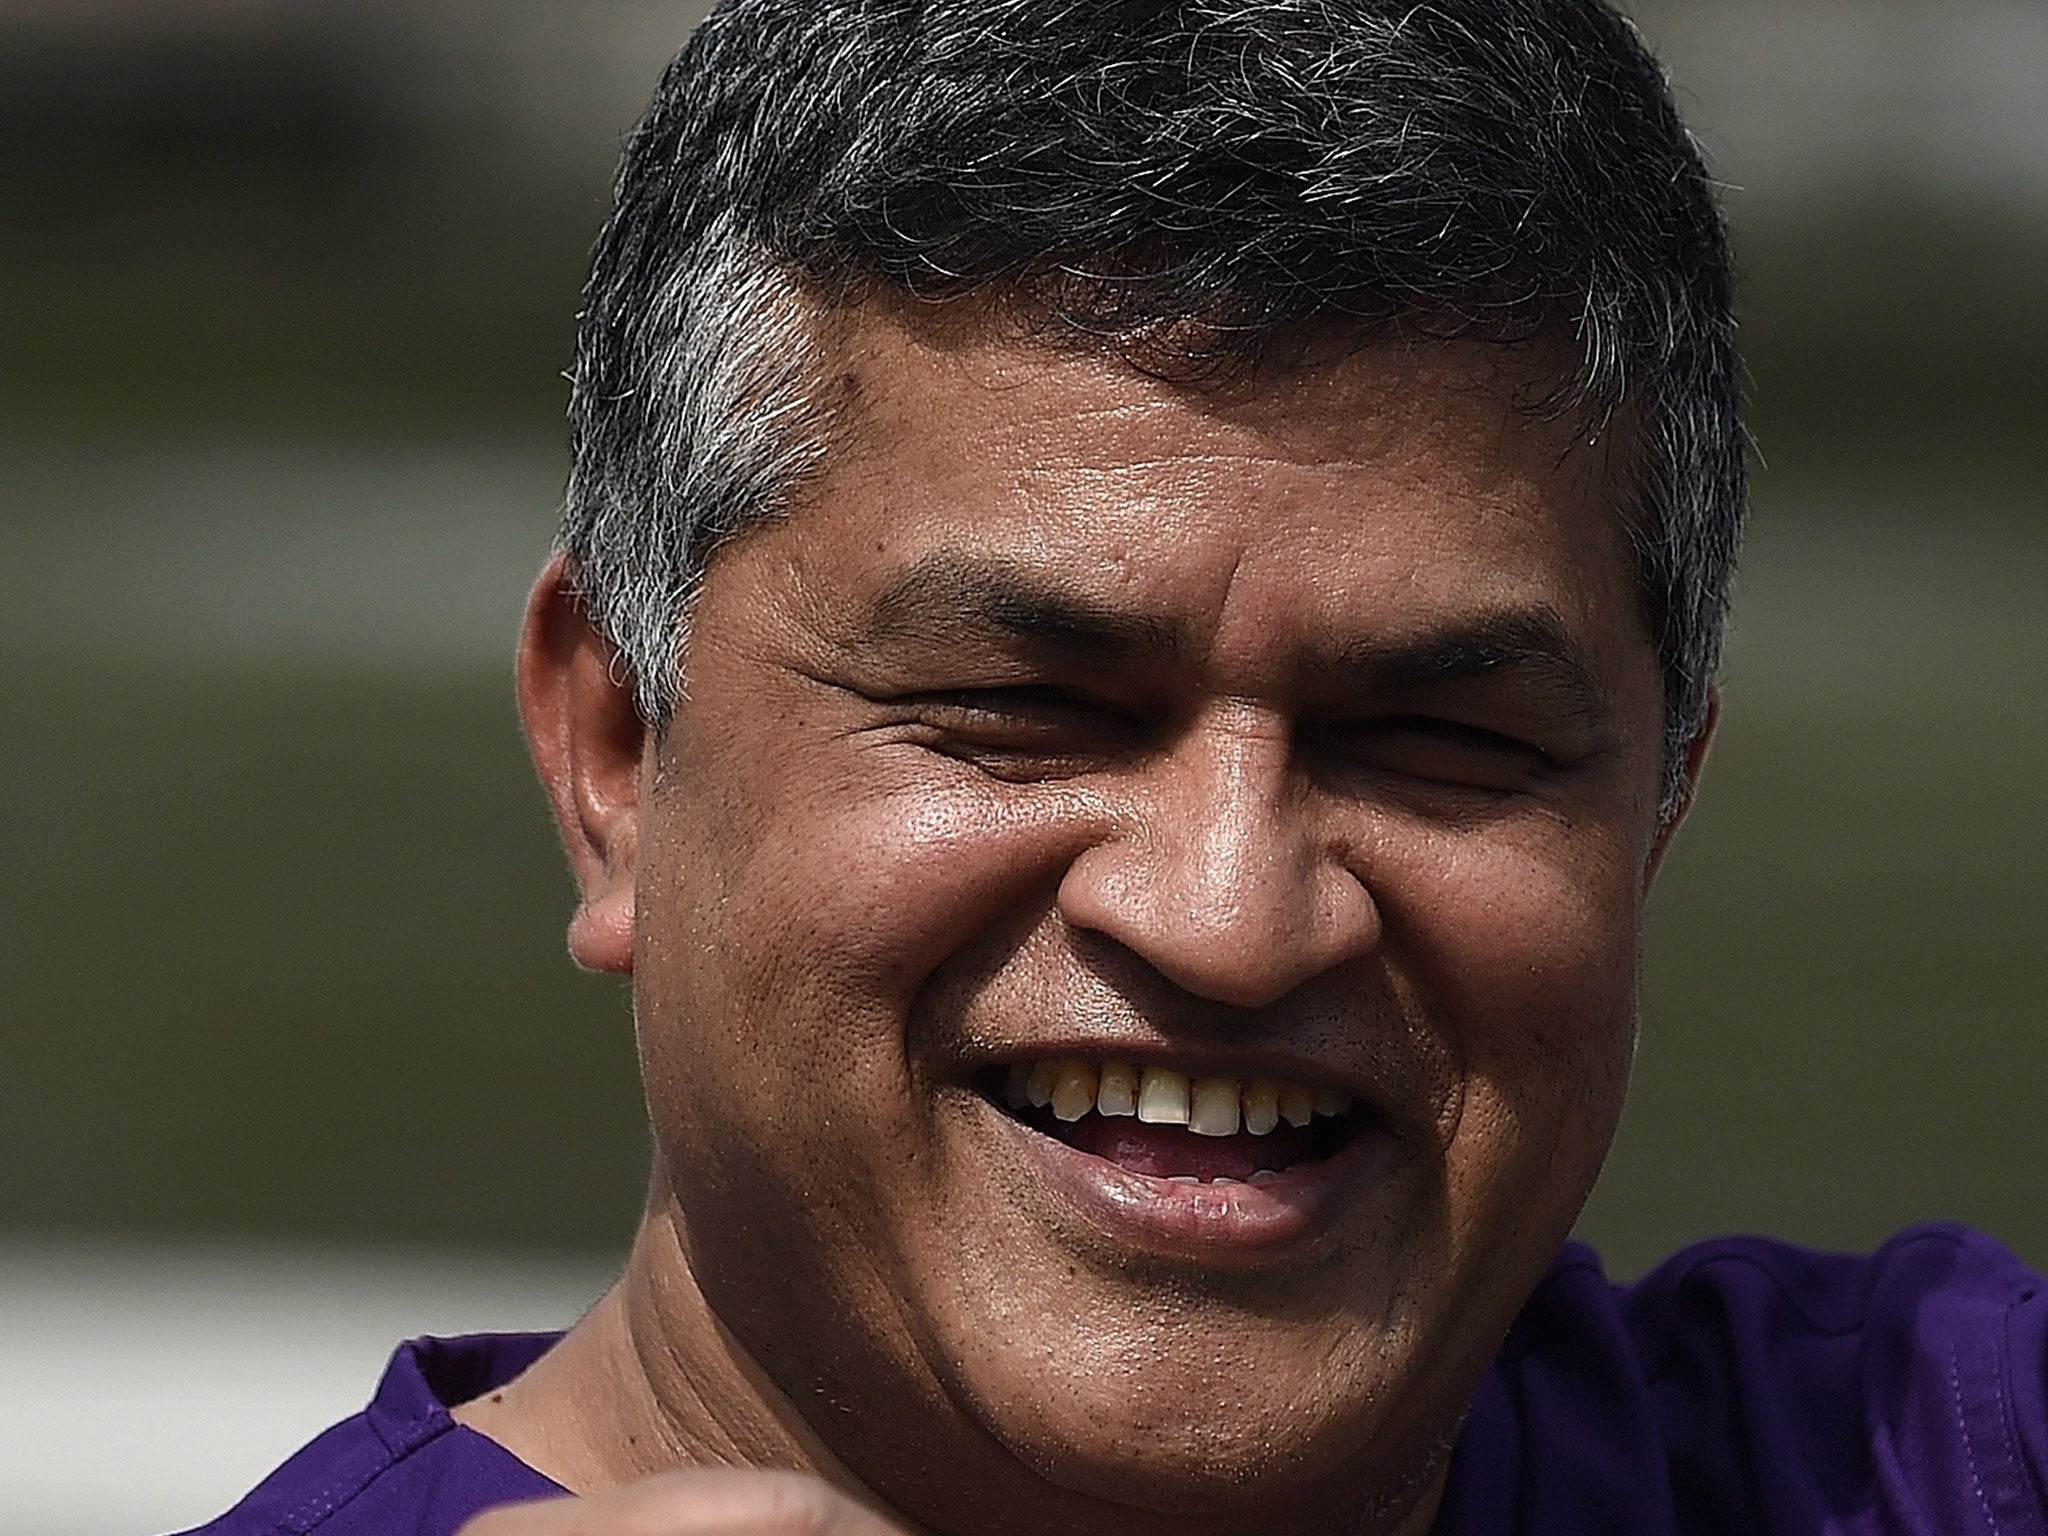 Malaysian cartoonist Zulkifli Anwar Ulhaque, popularly known as Zunar, has been charged with sedition.